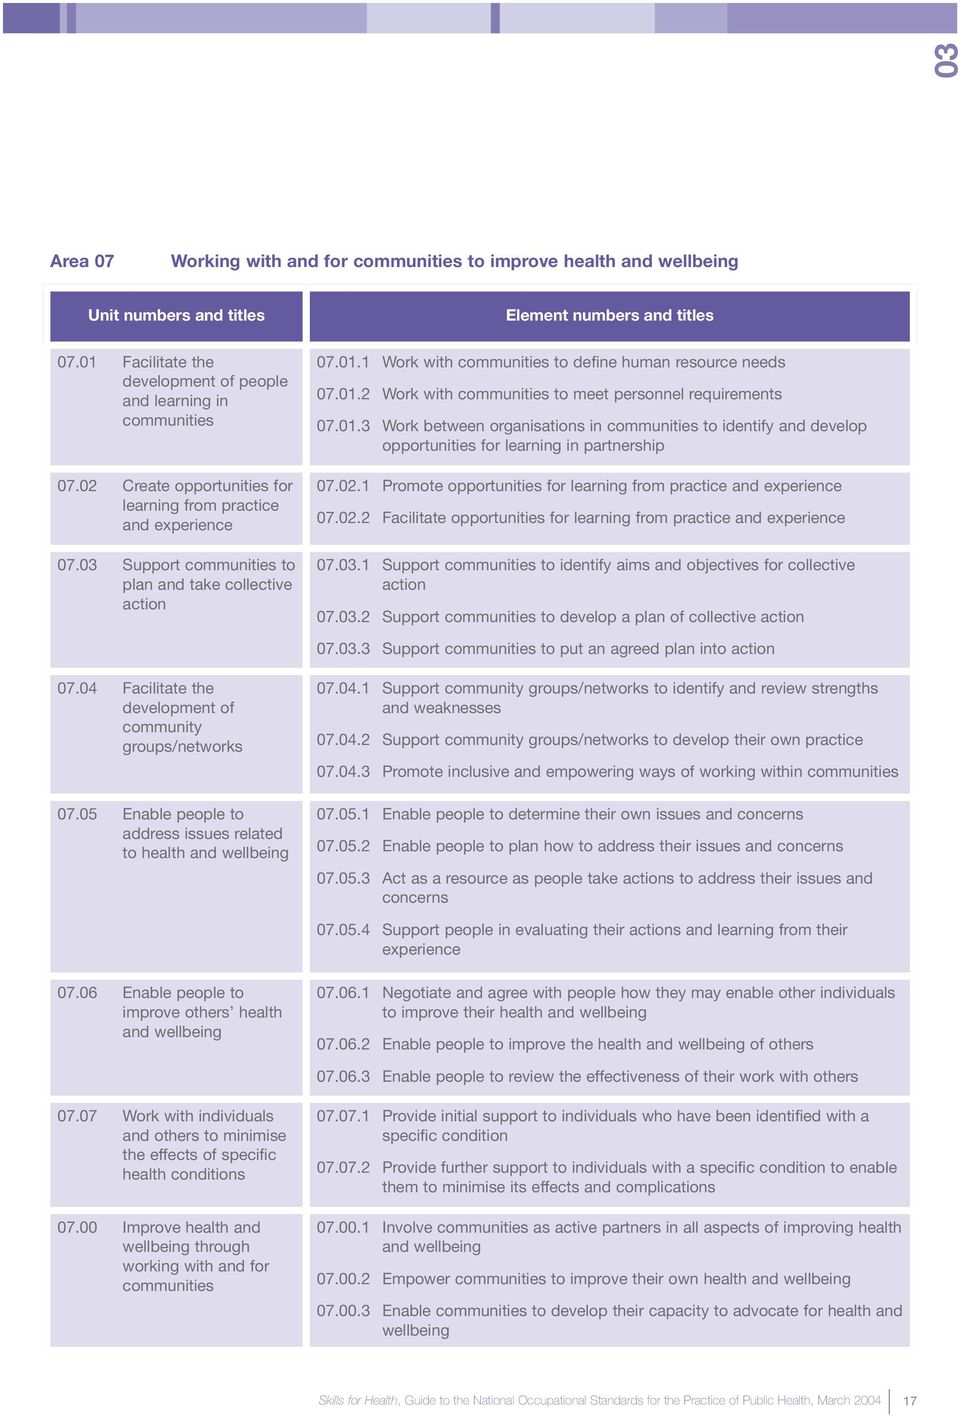 1 Work with communities to define human resource needs 07.01.2 Work with communities to meet personnel requirements 07.01.3 Work between organisations in communities to identify and develop opportunities for learning in partnership 07.